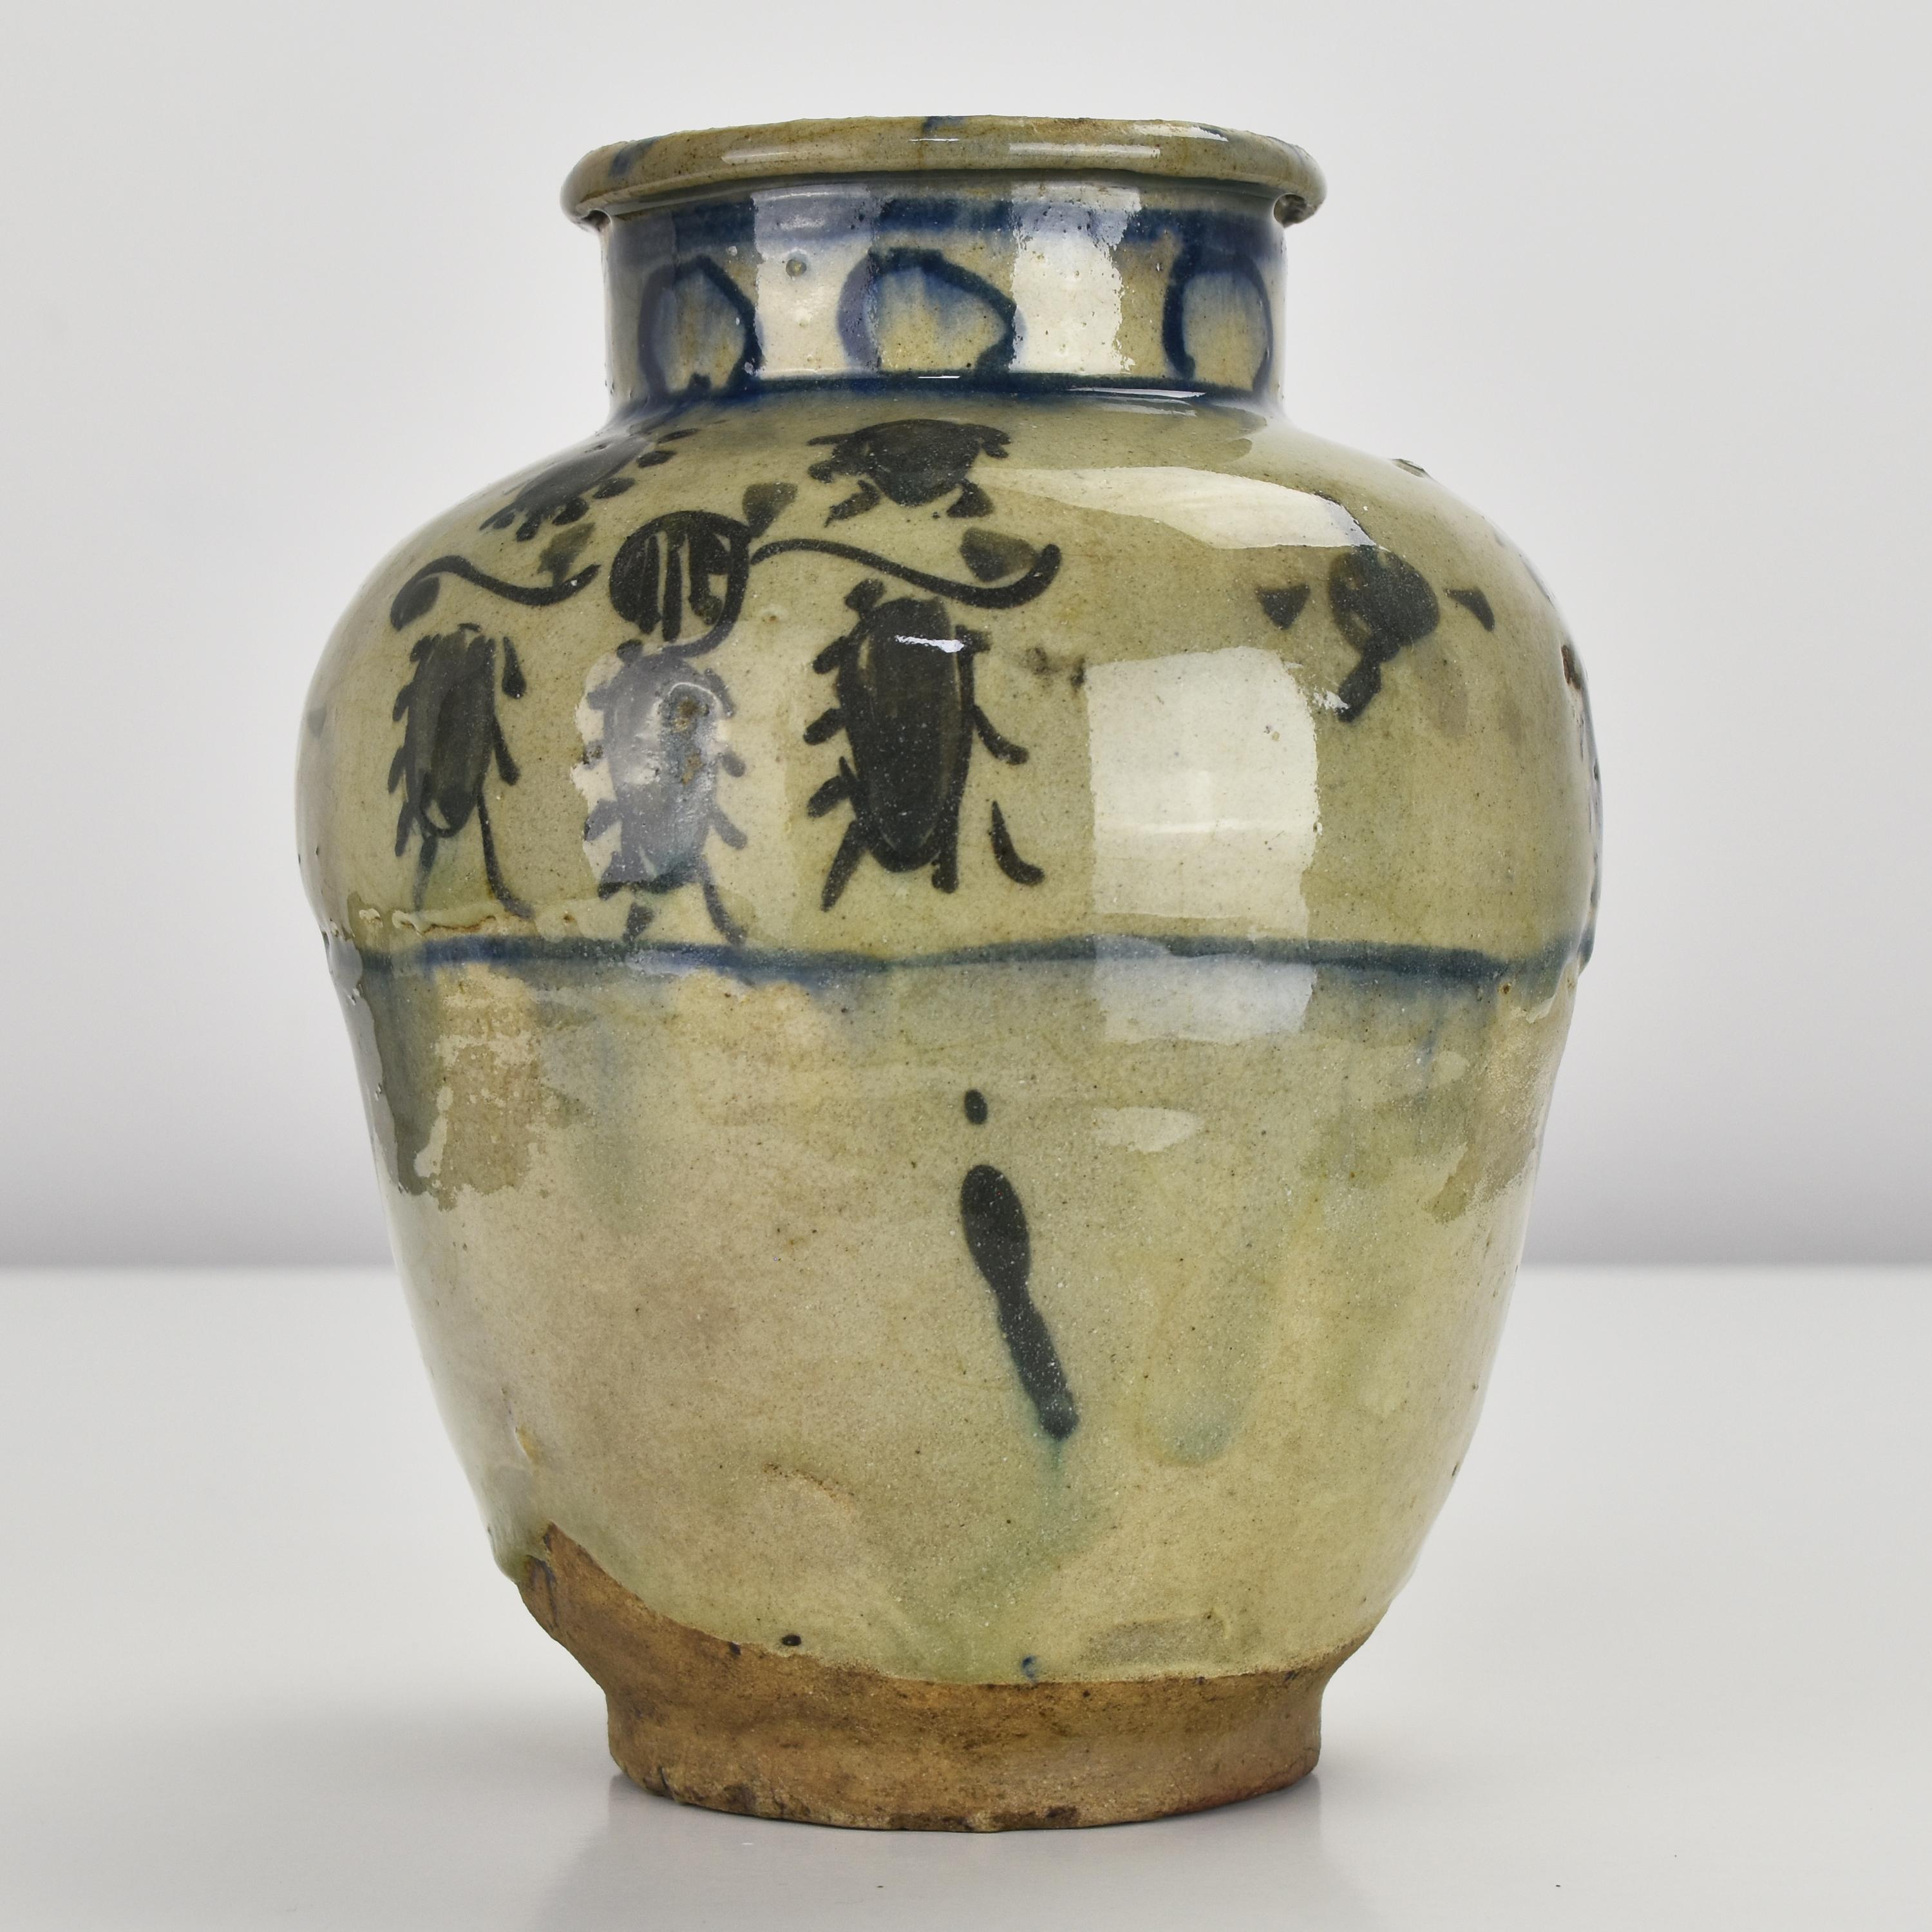 This antique ceramic jar or vase is believed to be from the 15th century and is of the Mamluk period. It is made of a sandy earthenware and features a thick glaze. The jar is decorated with polychrome handpainted floral elements in green to the body